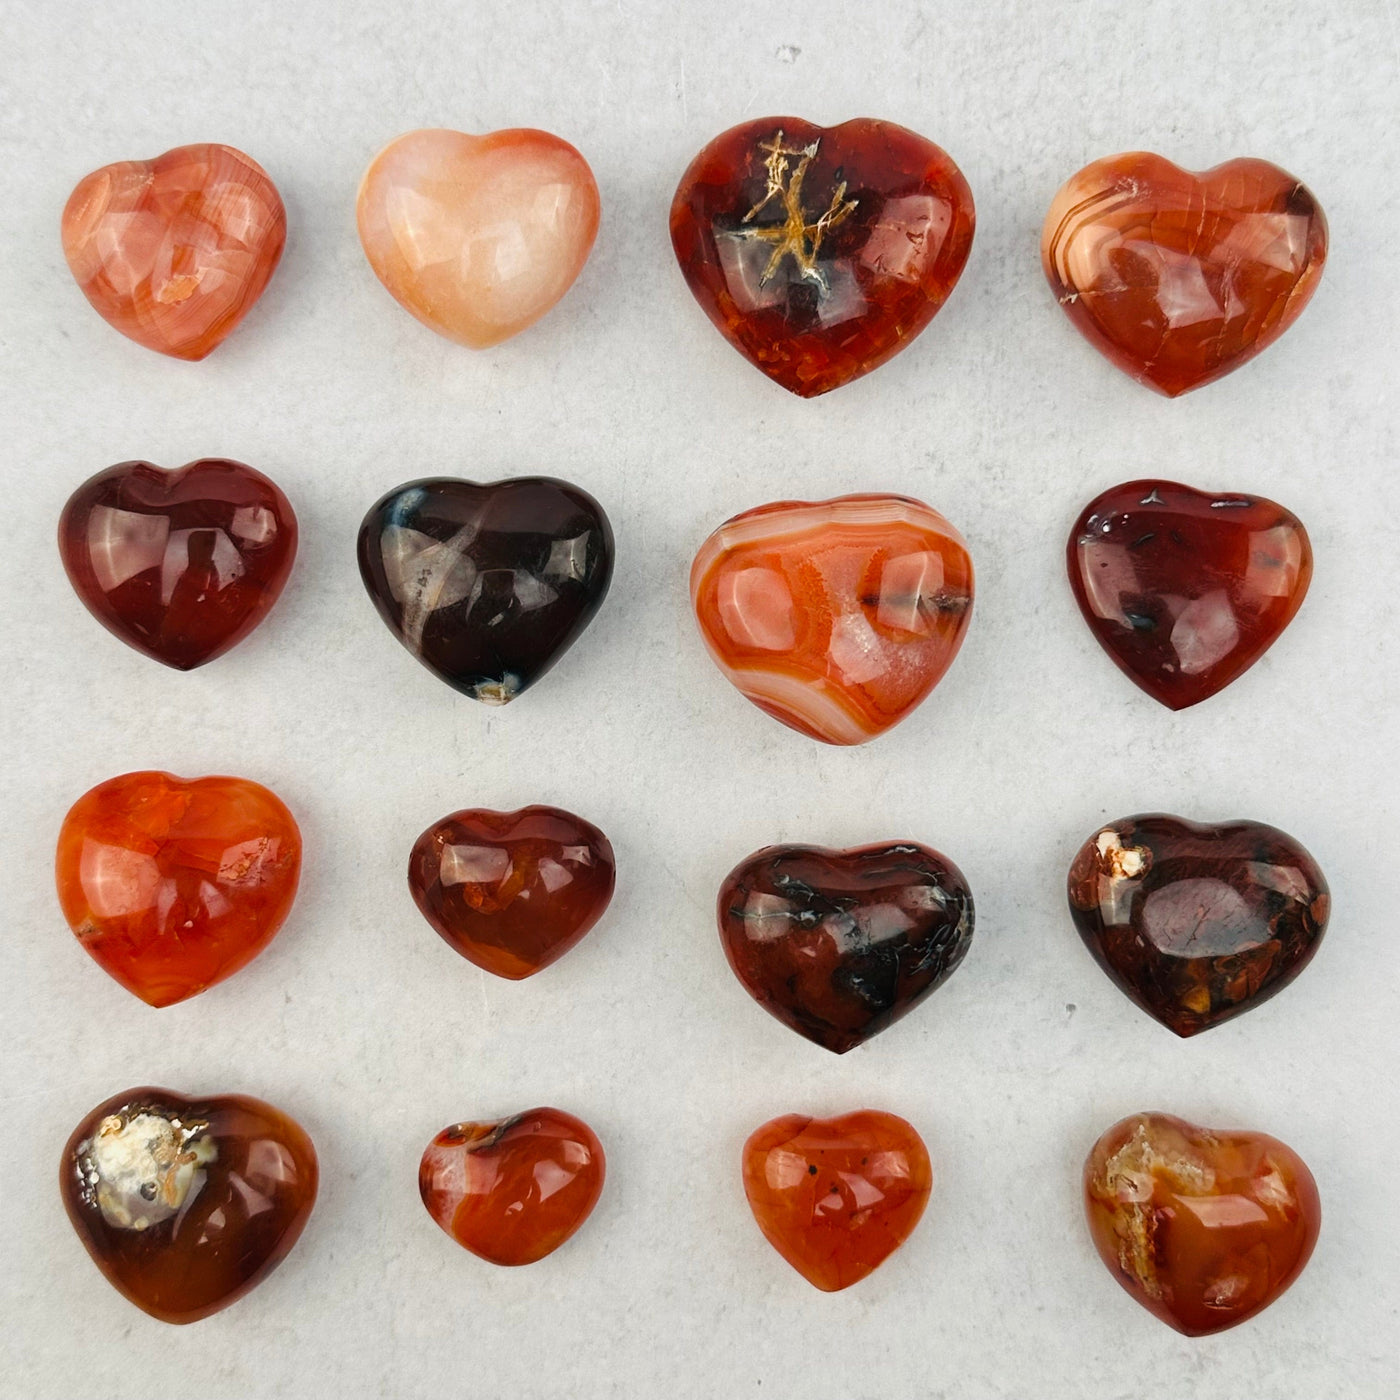 multiple hearts displayed to show the differences in the sizes and color shades 